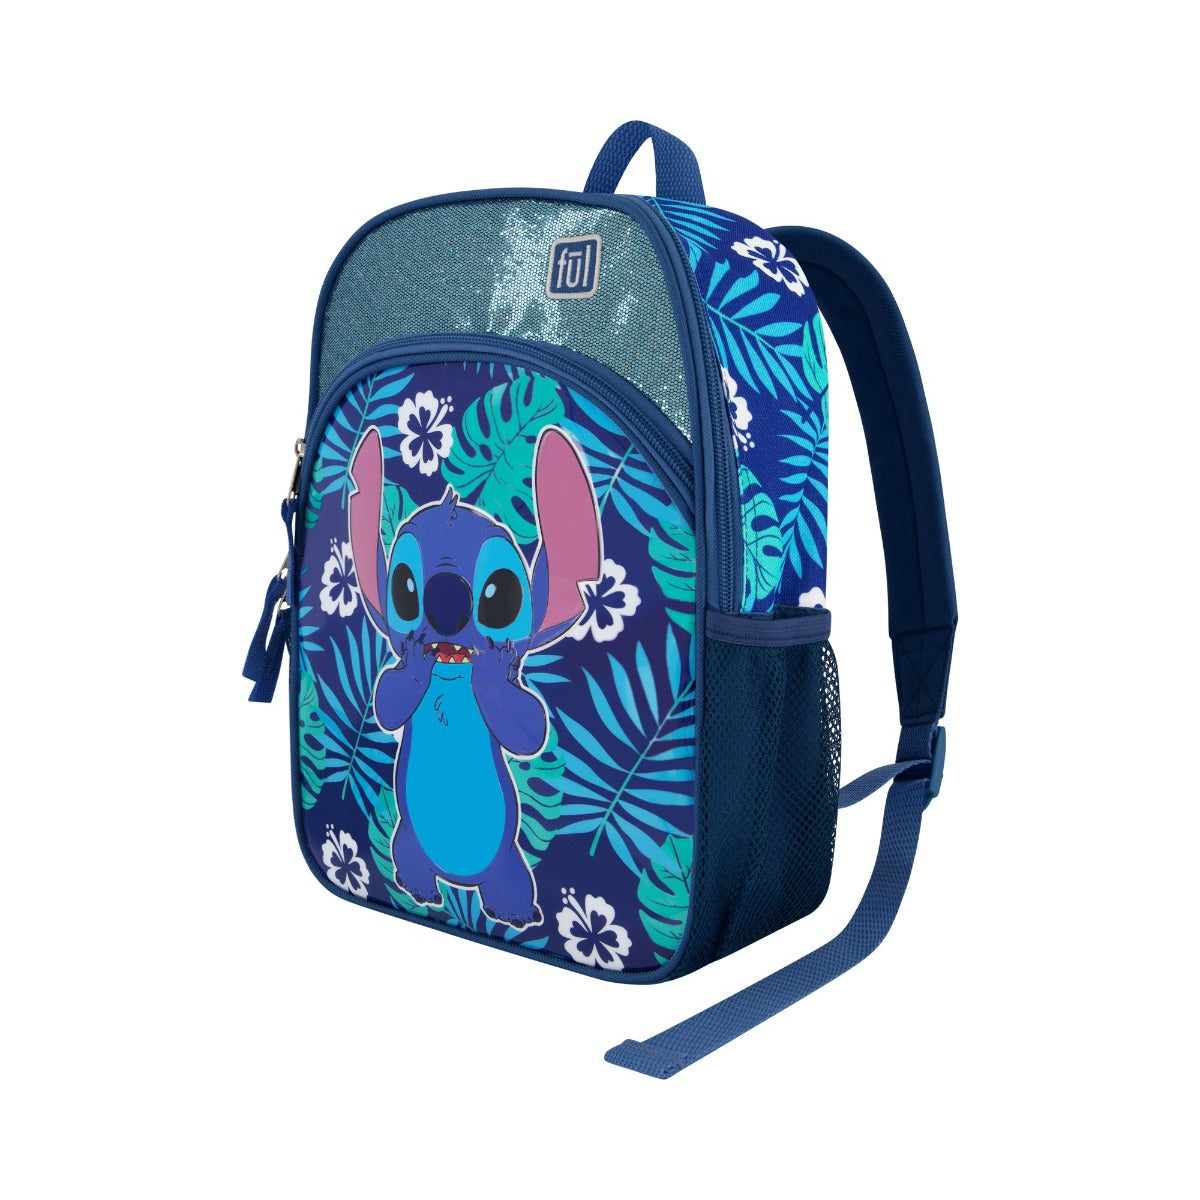 Disney Ful Stitch tropical leaves 2 piece set - 13 inch backpack for kids